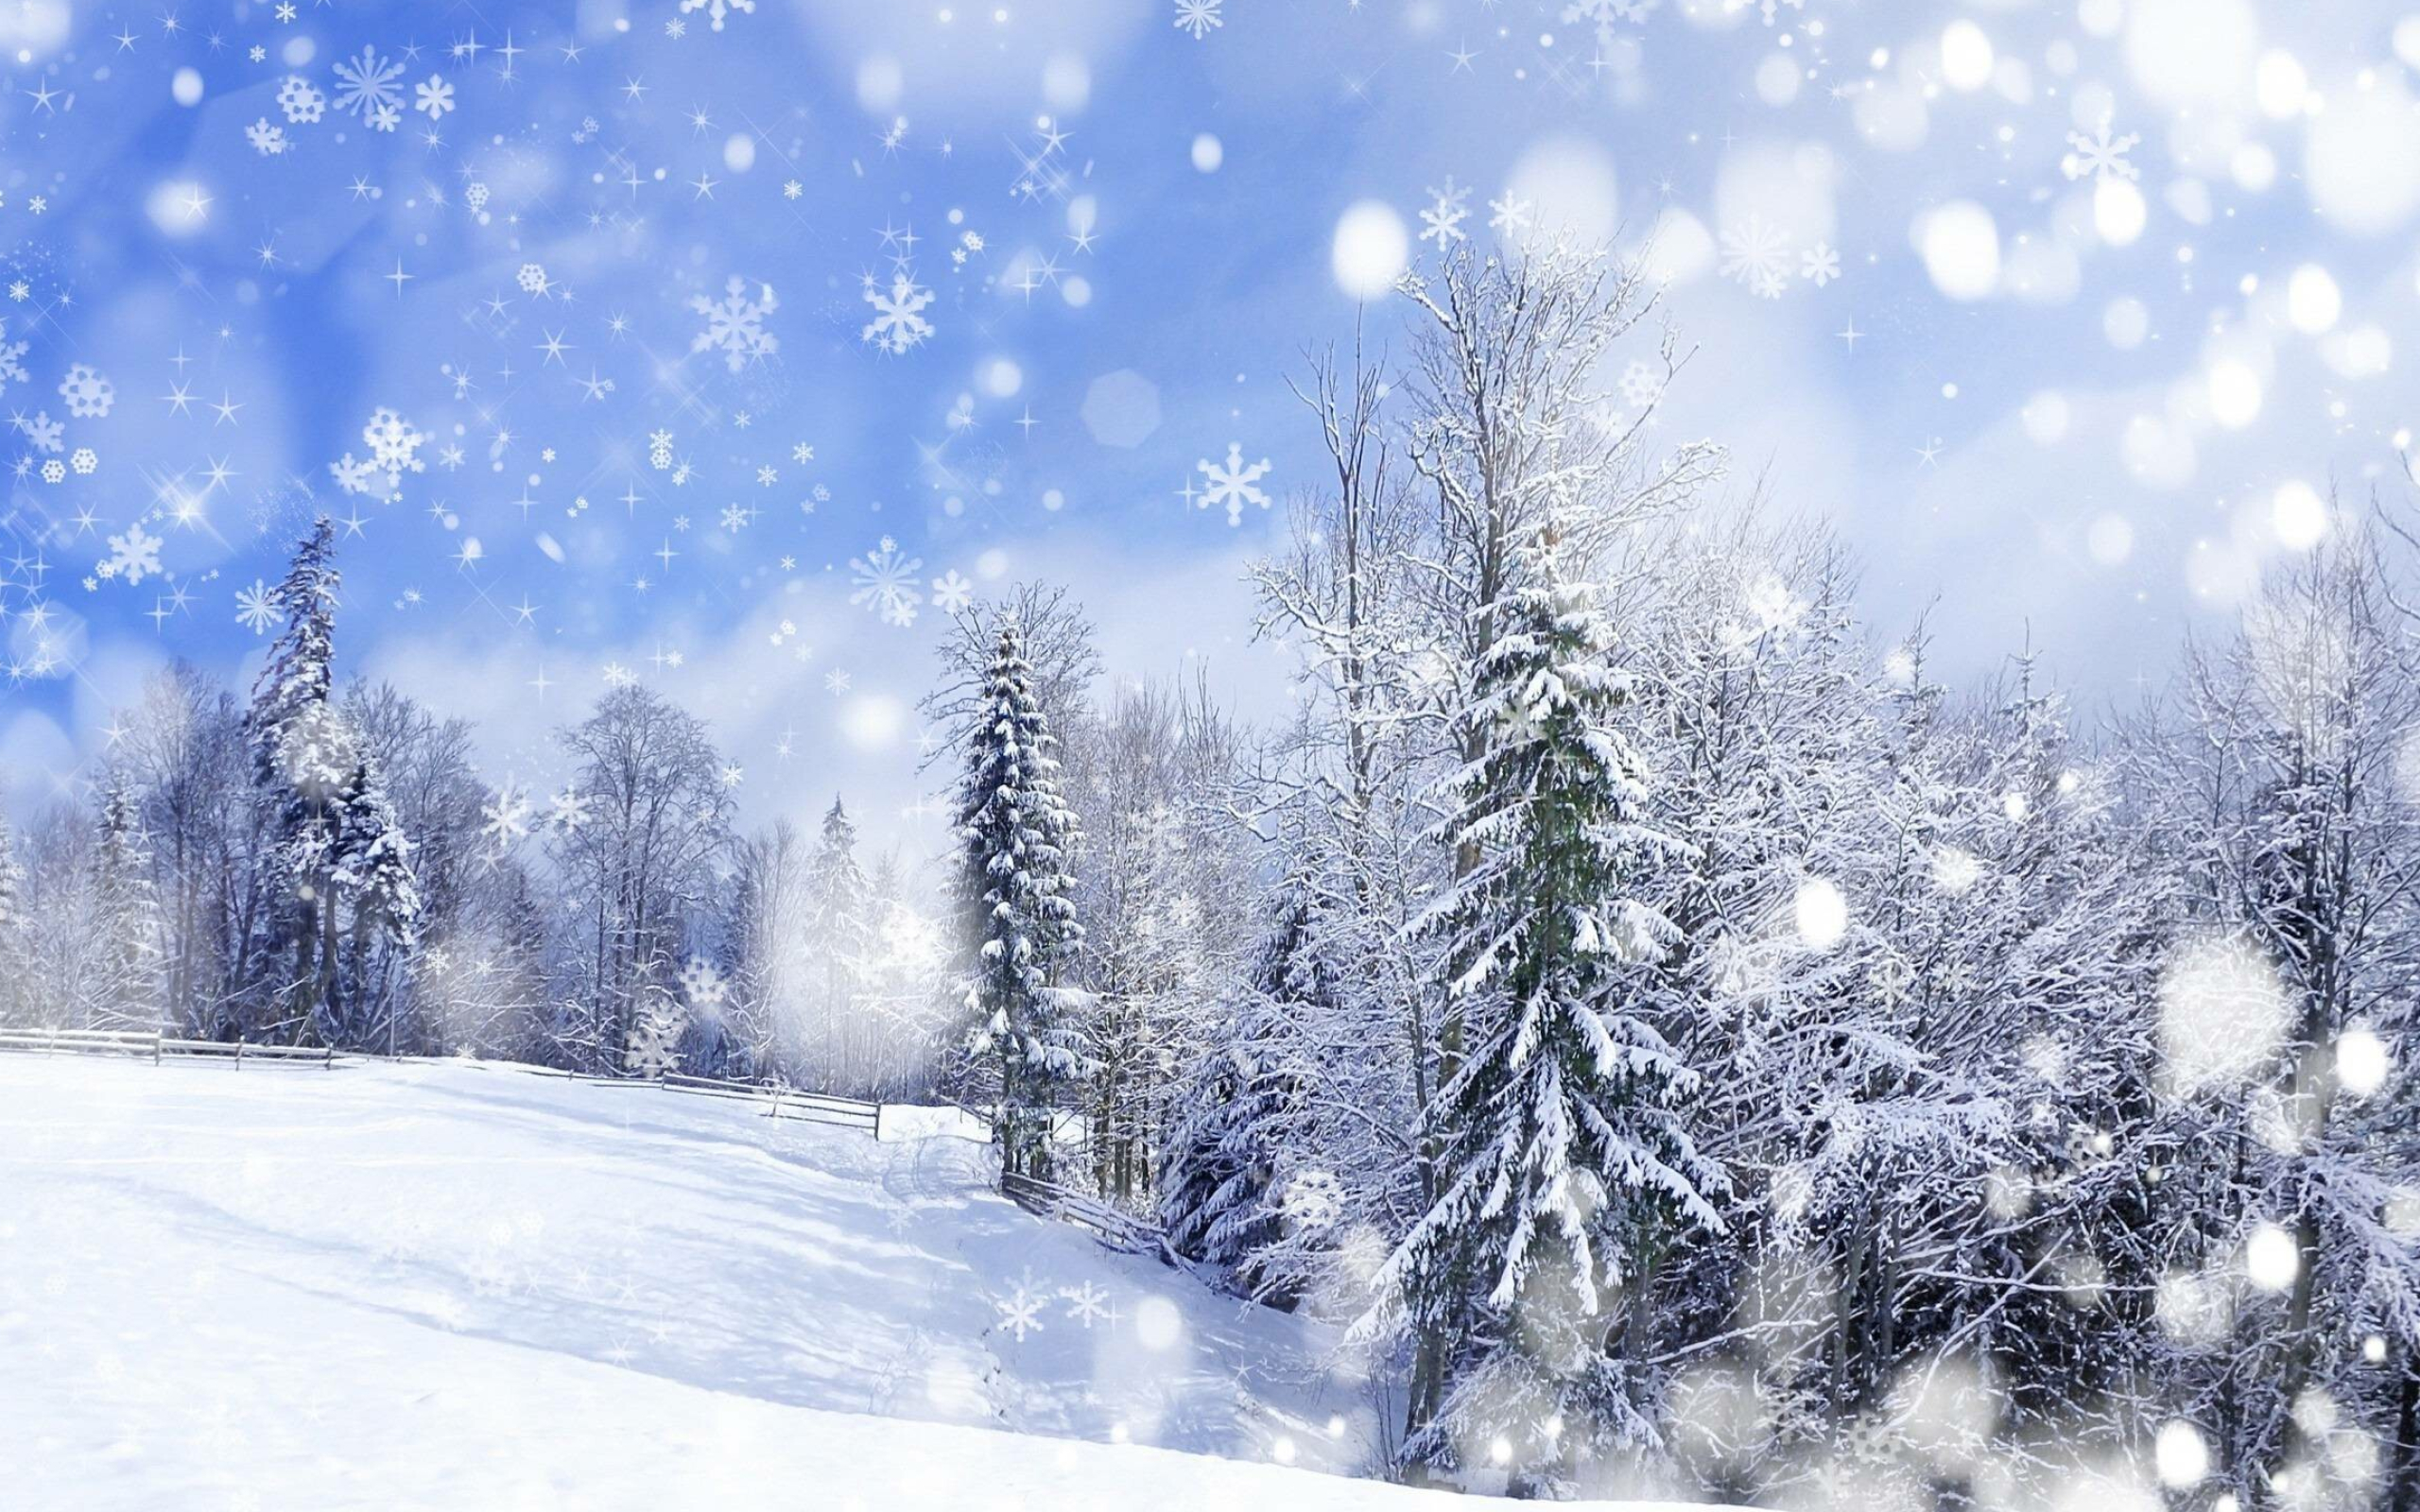 Snowfall: Precipitation of crystallized water from the clouds, Winter. 2560x1600 HD Wallpaper.